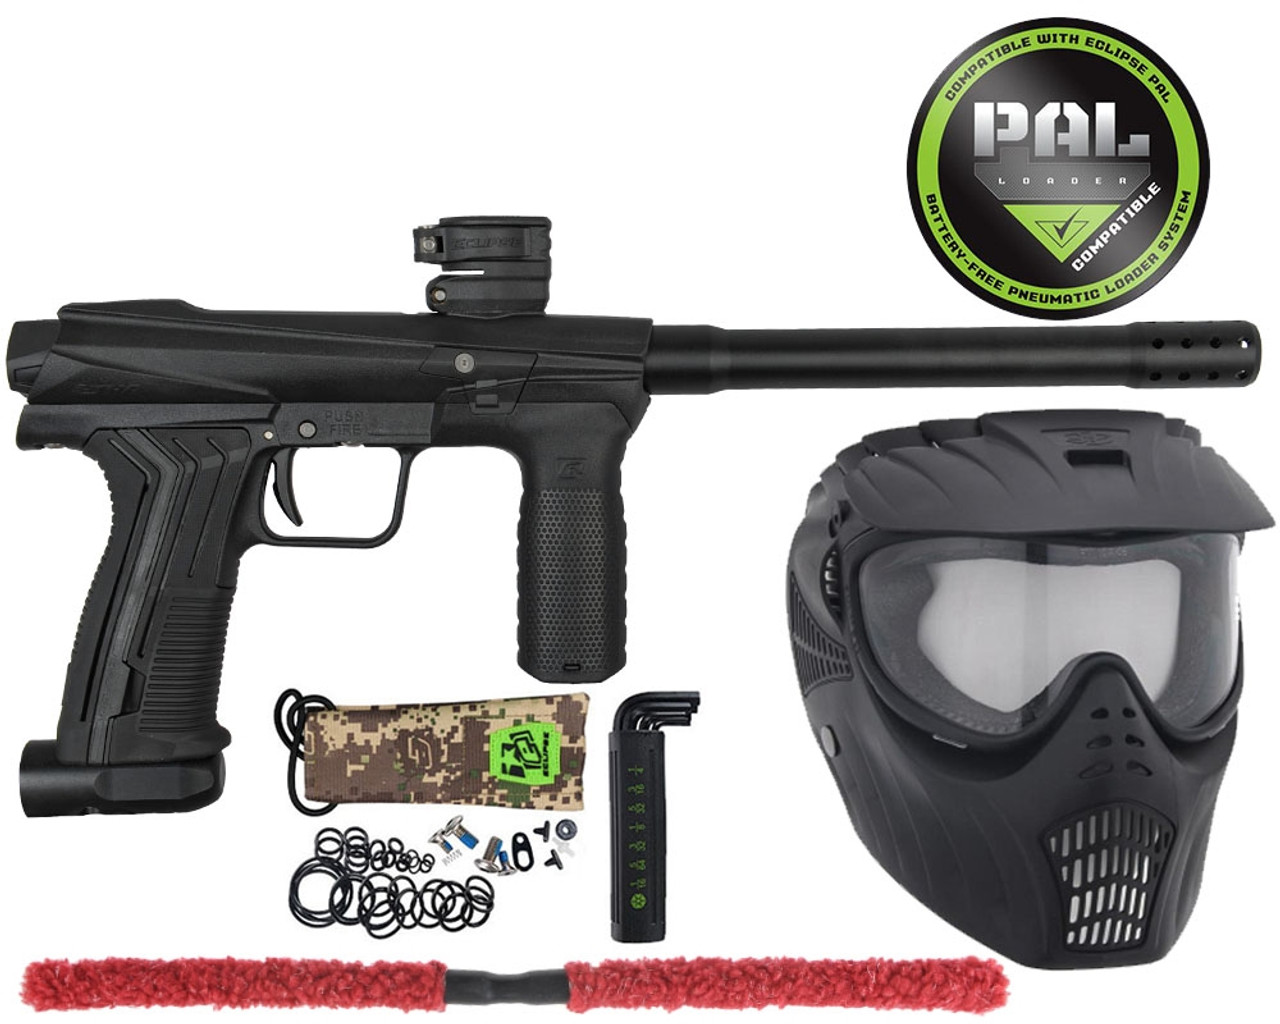 Planet Eclipse Ego LV1.6 LV Series Grip Kit Red - Paintball Revolution